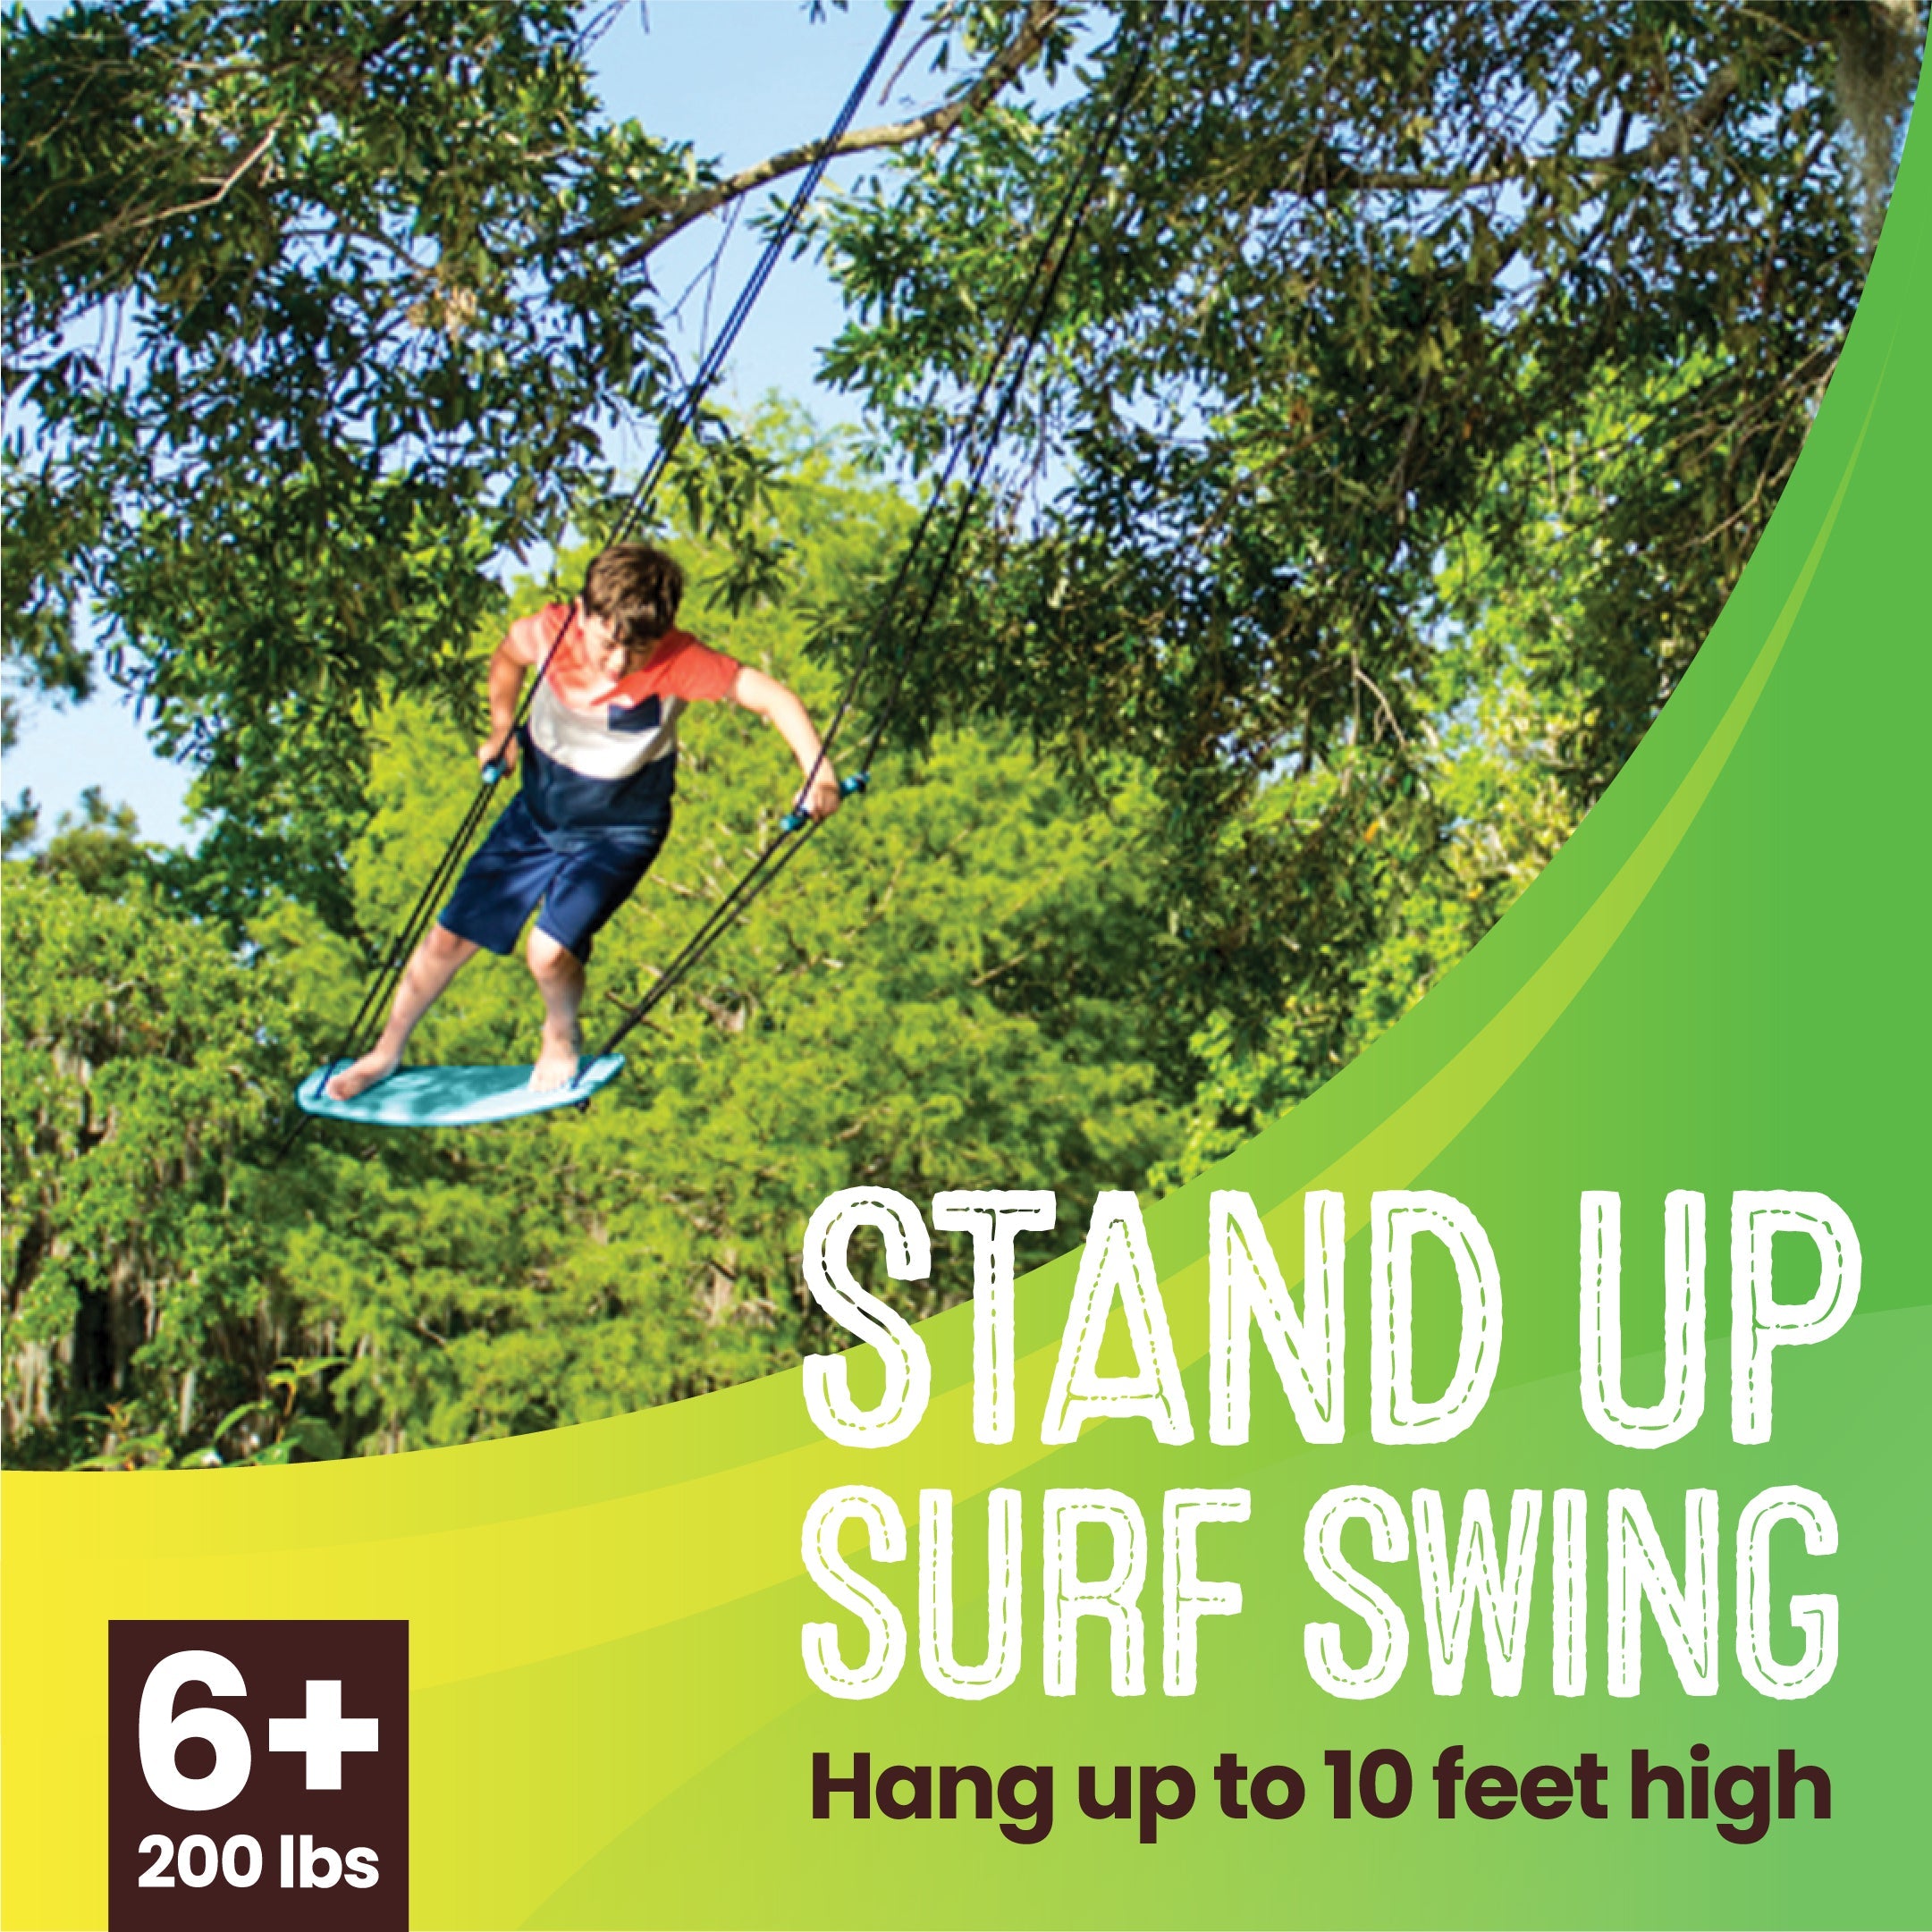 Kick Stand Up Outdoor Surfing Tree Swing for Kids Up to 150 Lbs